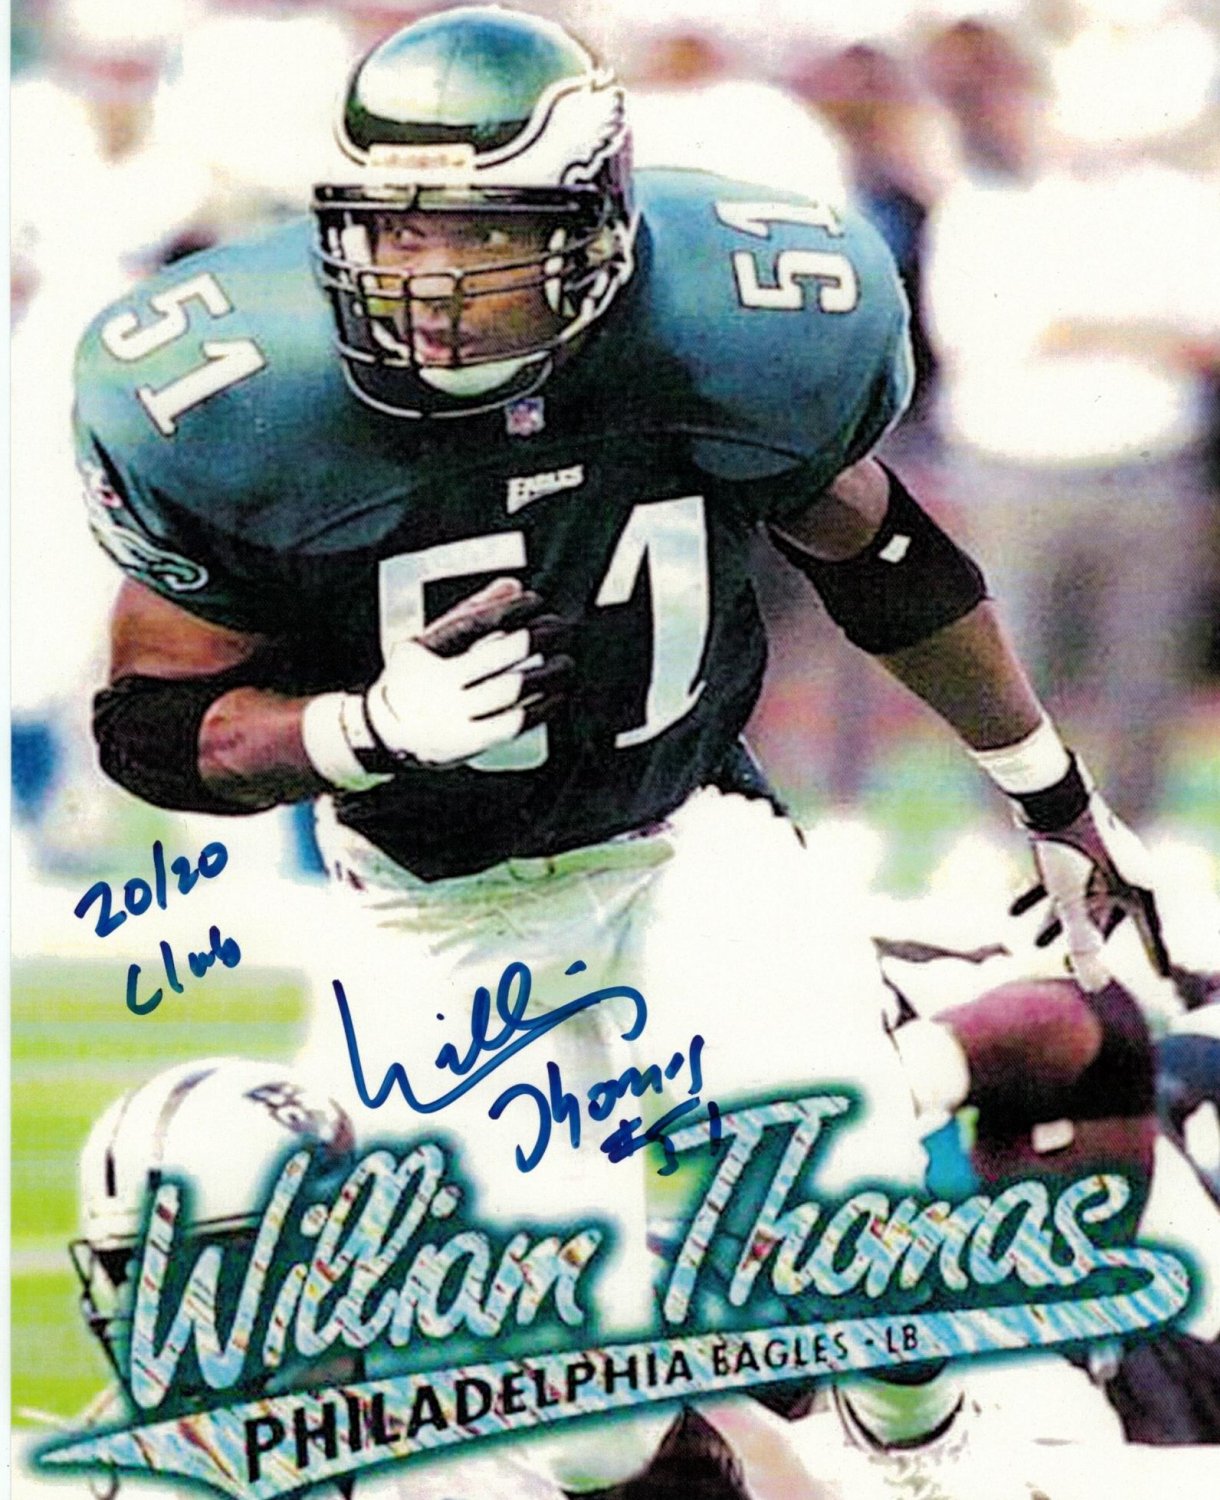 William Thomas Philadelphia Eagles Autographed Signed 8x10 Photo Inscribed  20/20 Club - Certified Authentic